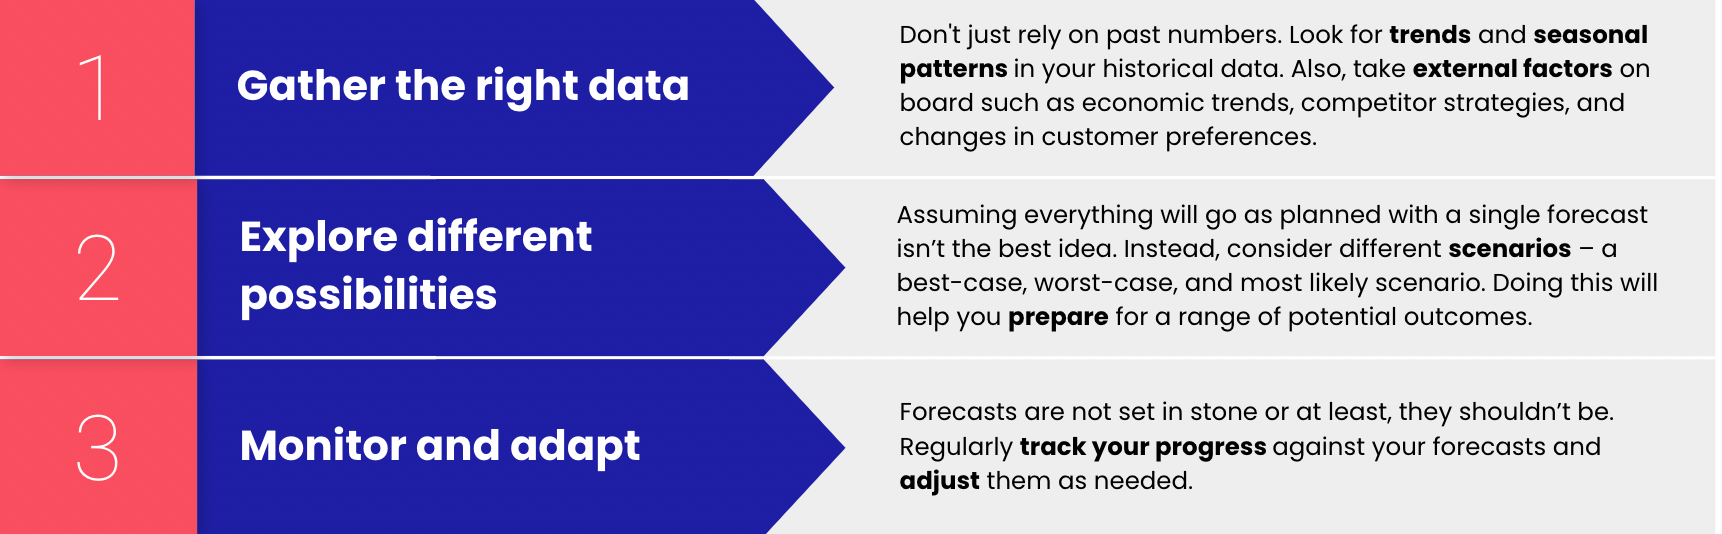 CFO pain points - more accurate forecasting tips